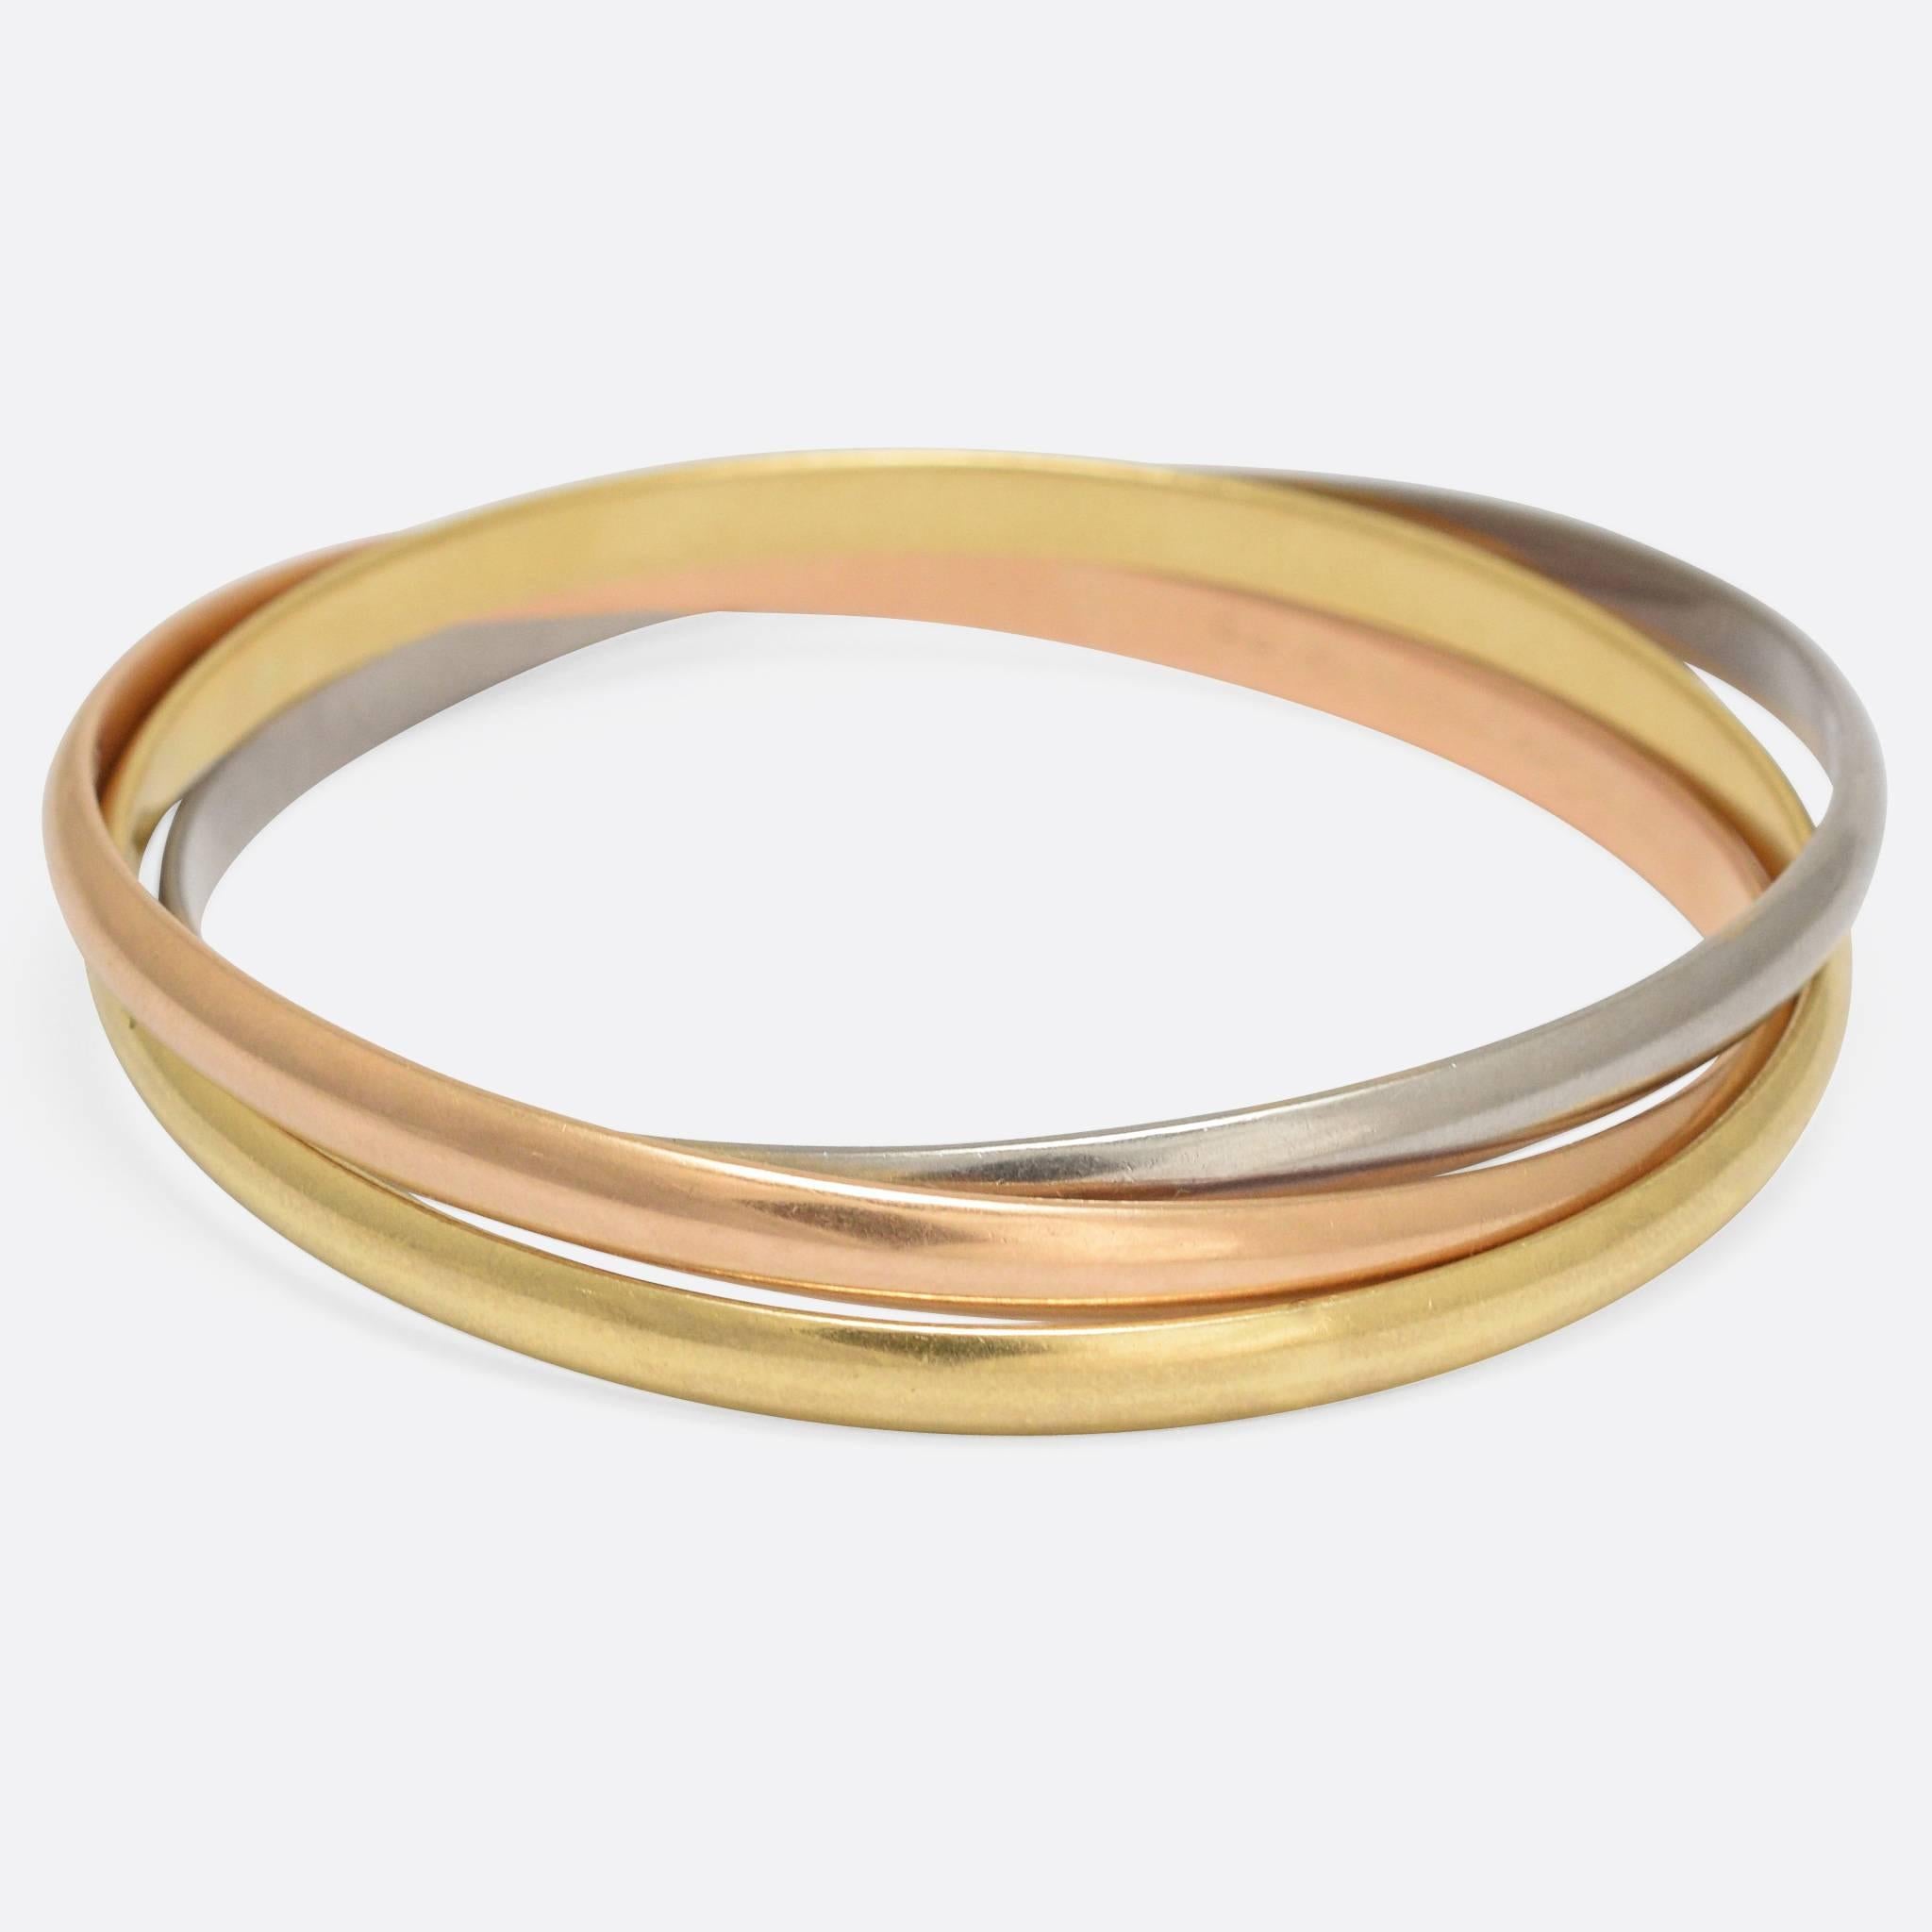 A classic set of vintage Cartier Trinity bangles, fully marked and modelled in 18k yellow, white and pink gold. They date to the 1970s, elegant and stylish, and offered in the original Cartier presentation box.

MEASUREMENTS
Inner circumference: 7